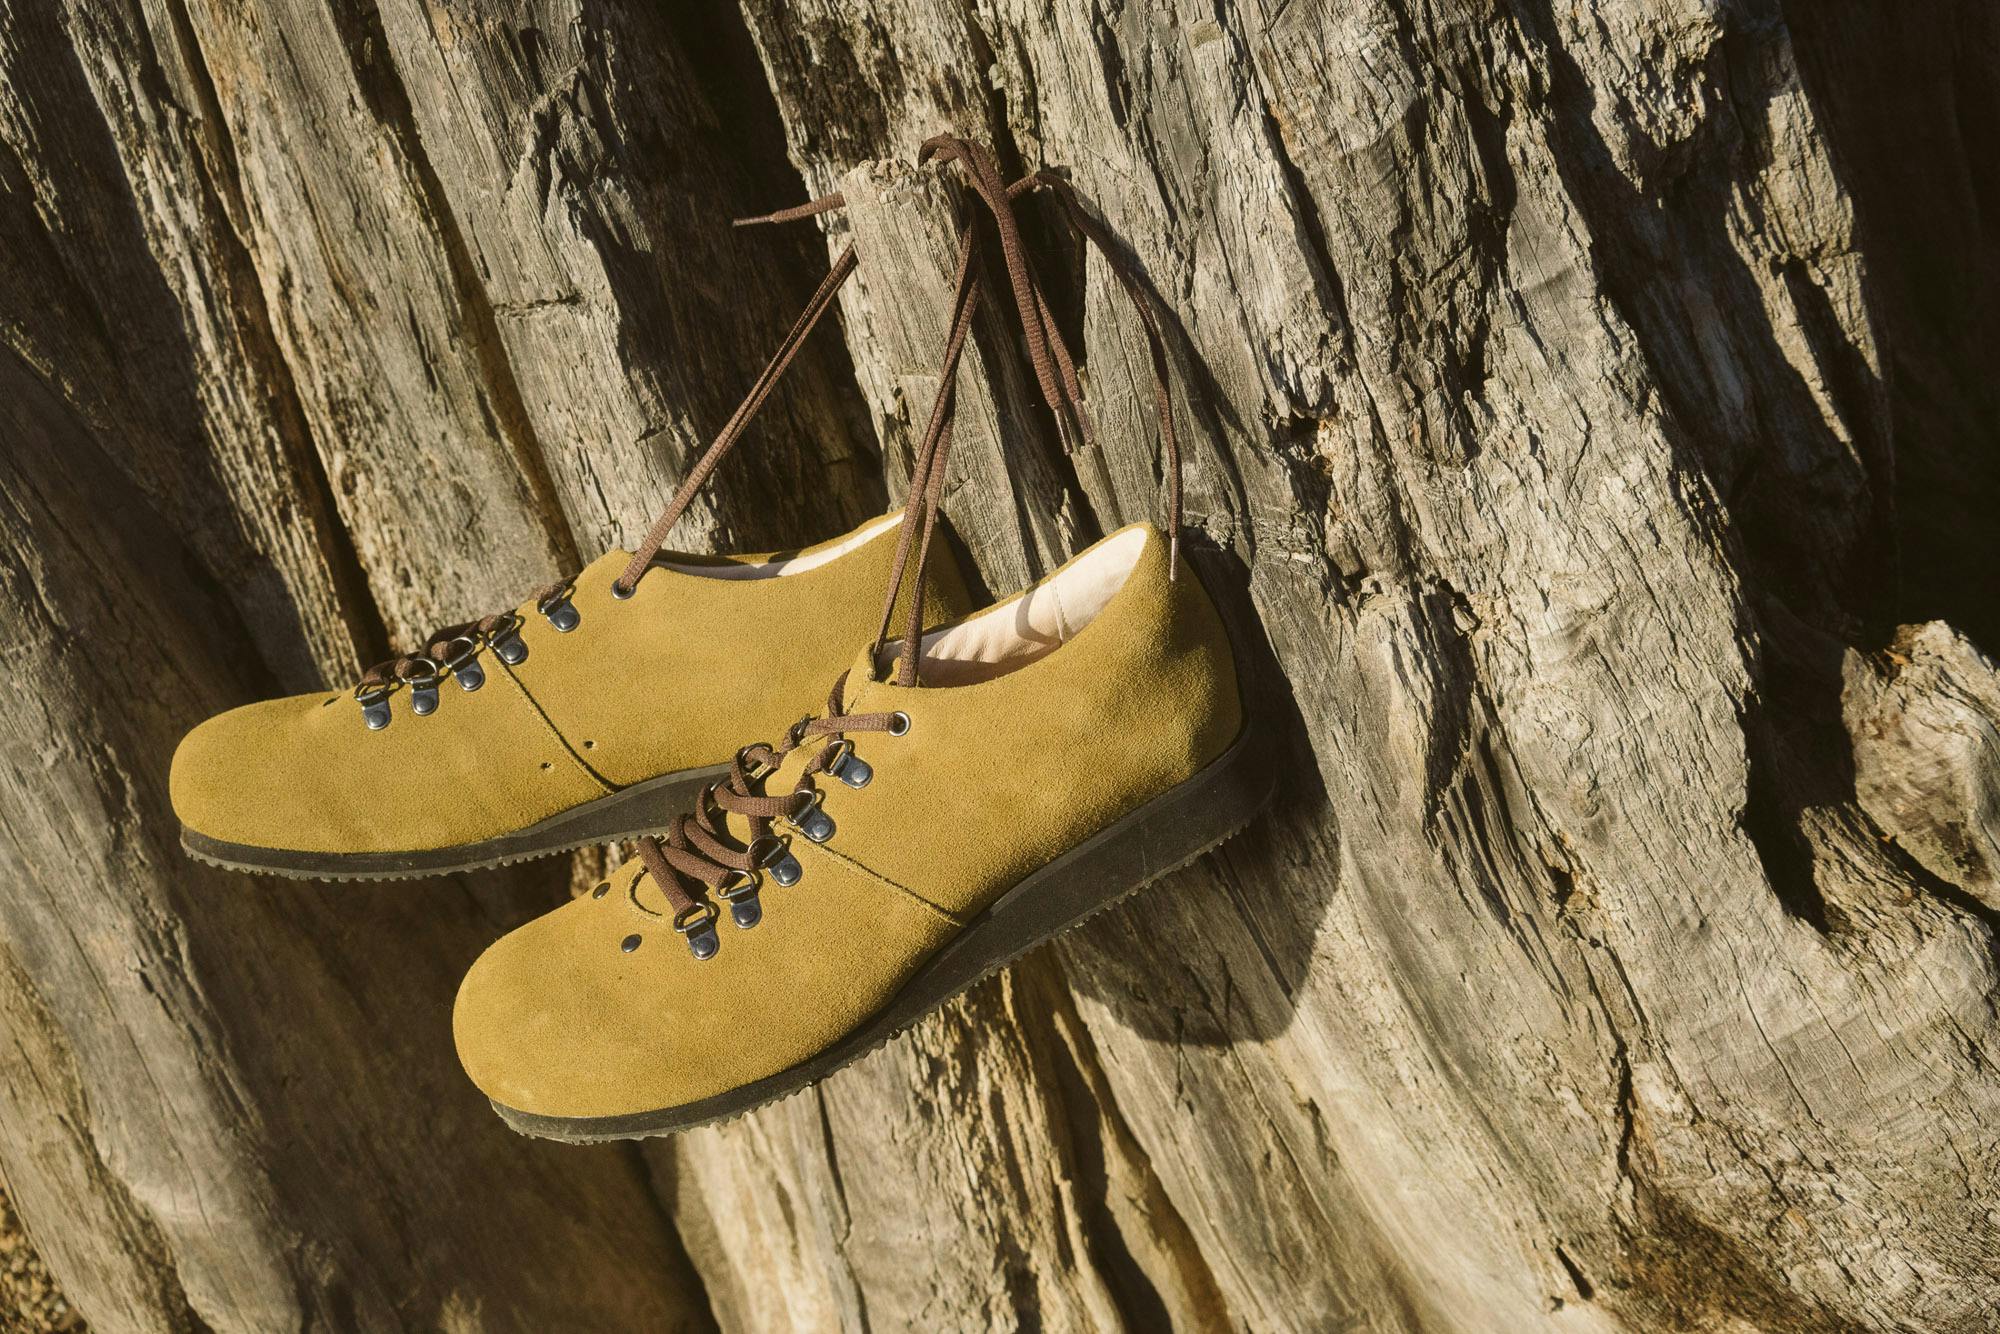 A pair of Stomplox shoes hanging on a tree.